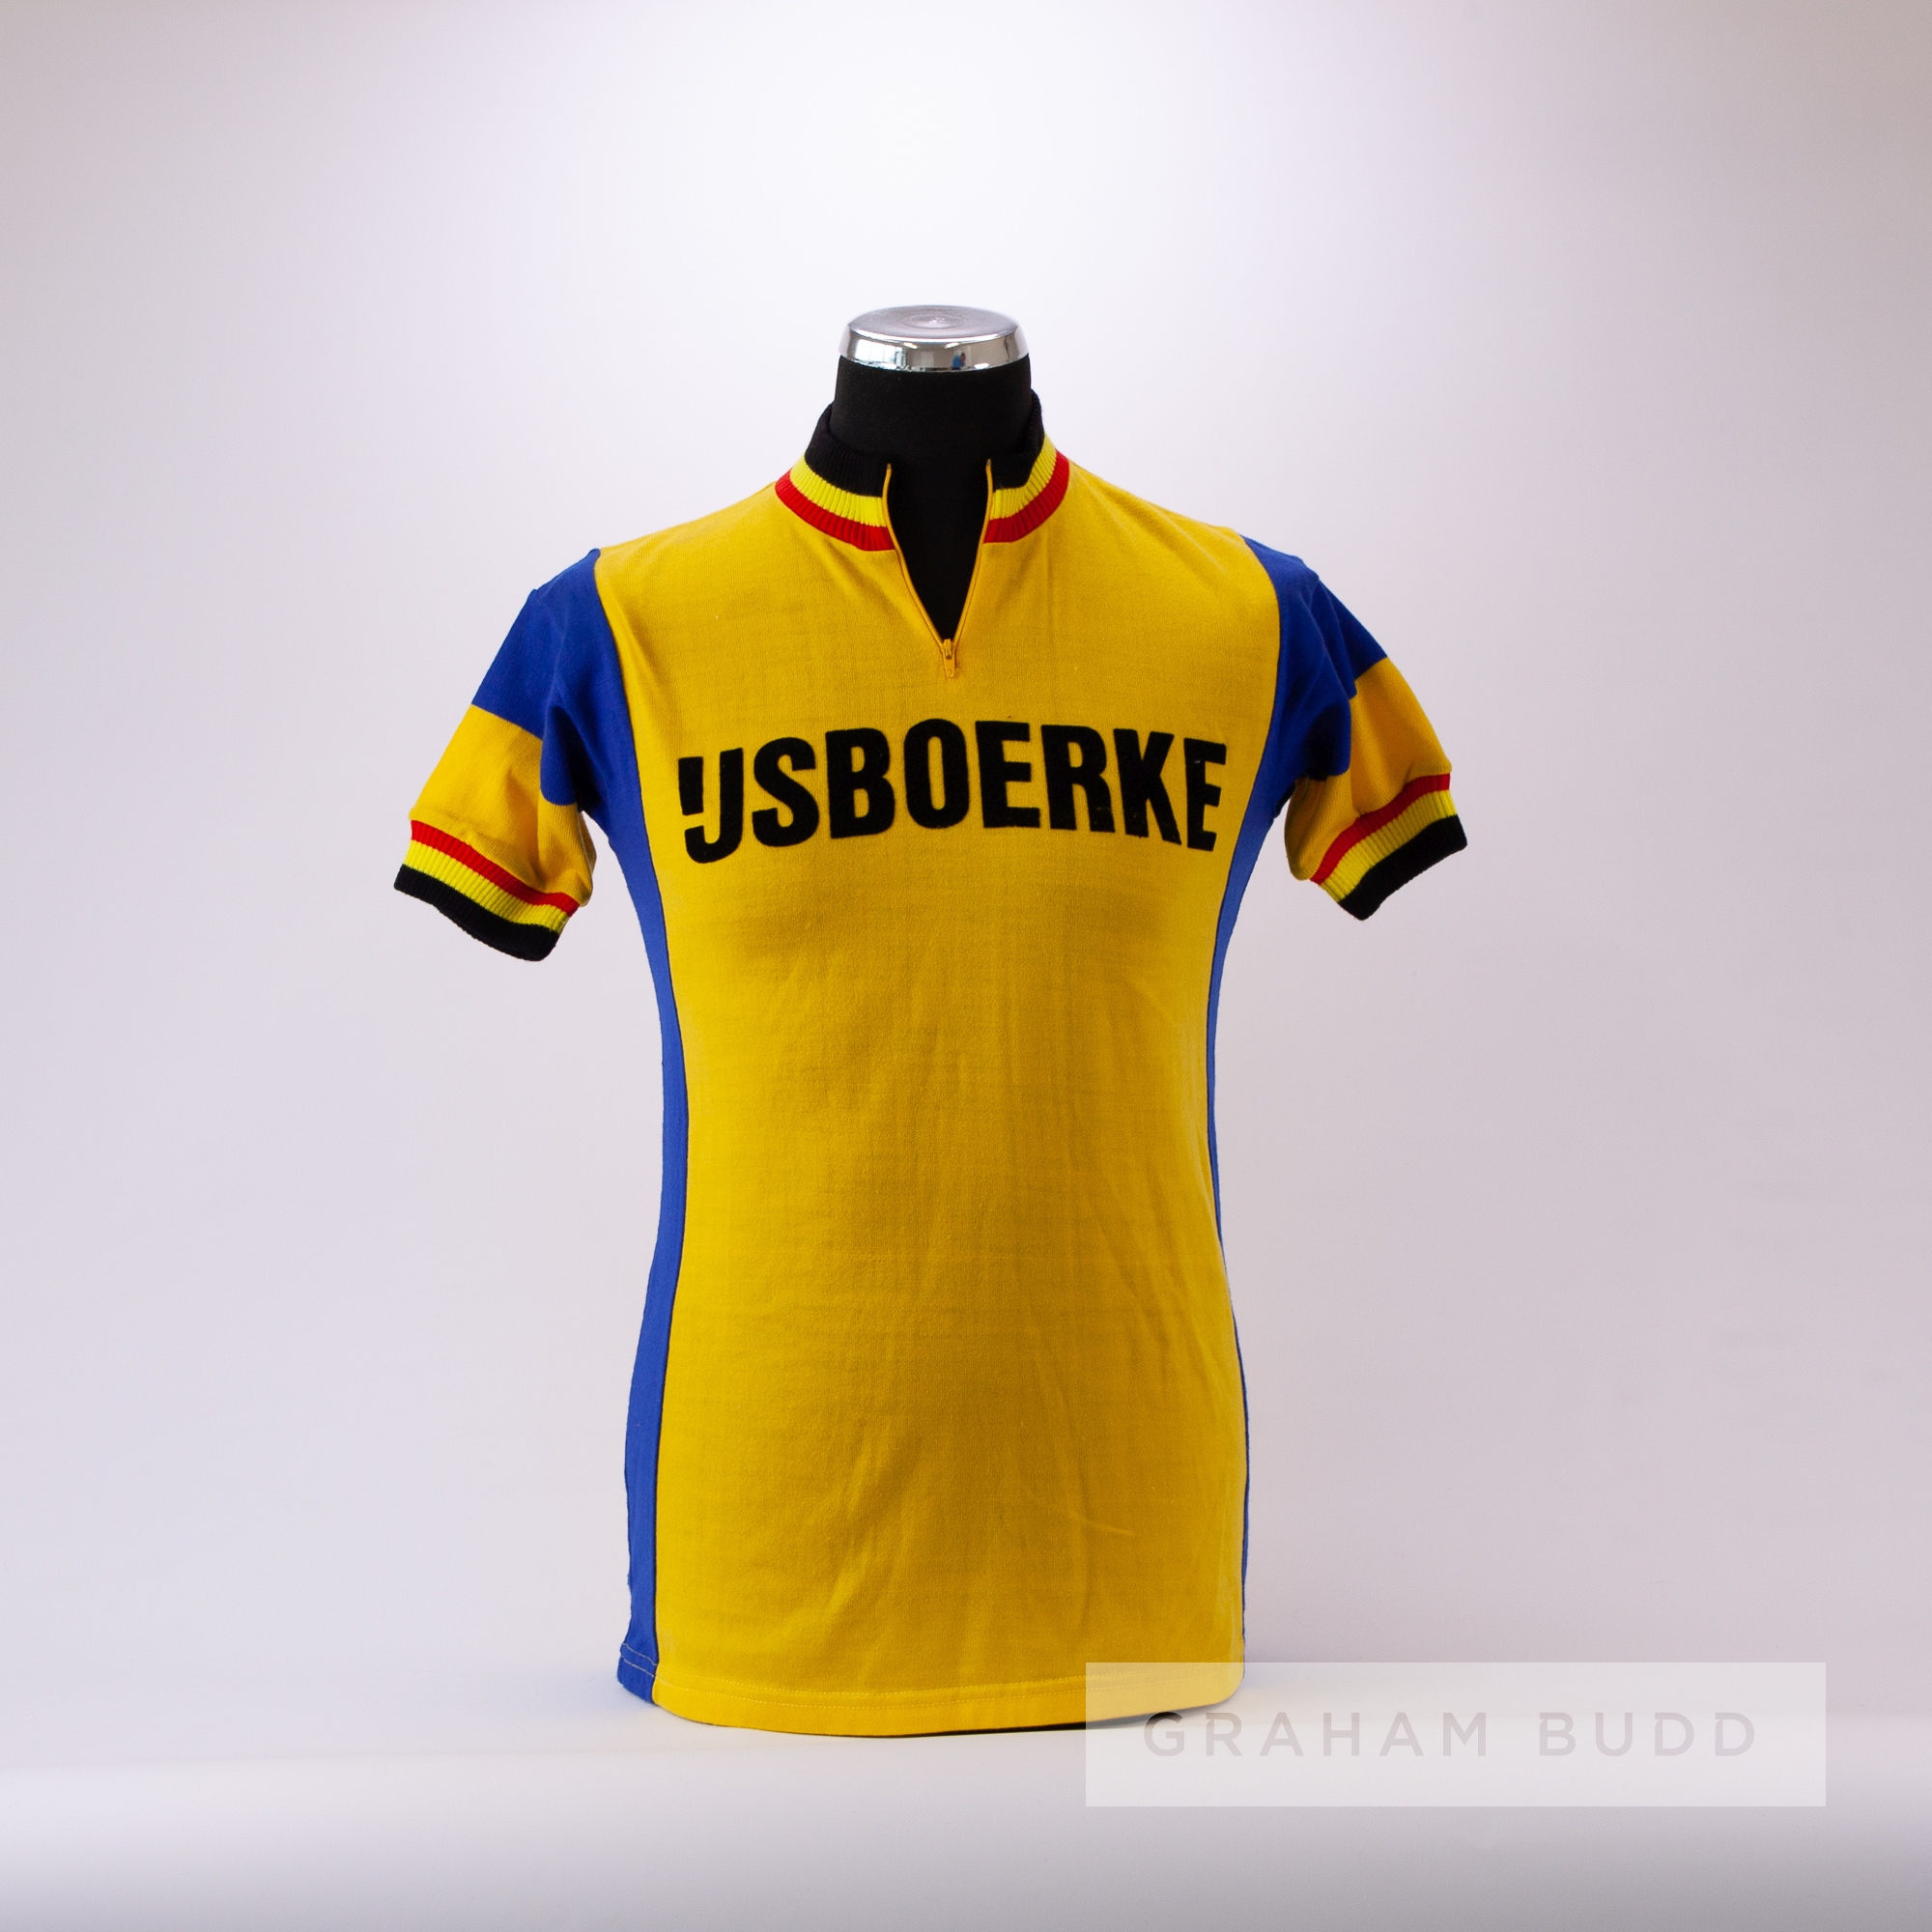 A yellow, blue and red vintage Usboerke Belgium Cycling team race jersey, scarce, acrylic short- - Image 3 of 4